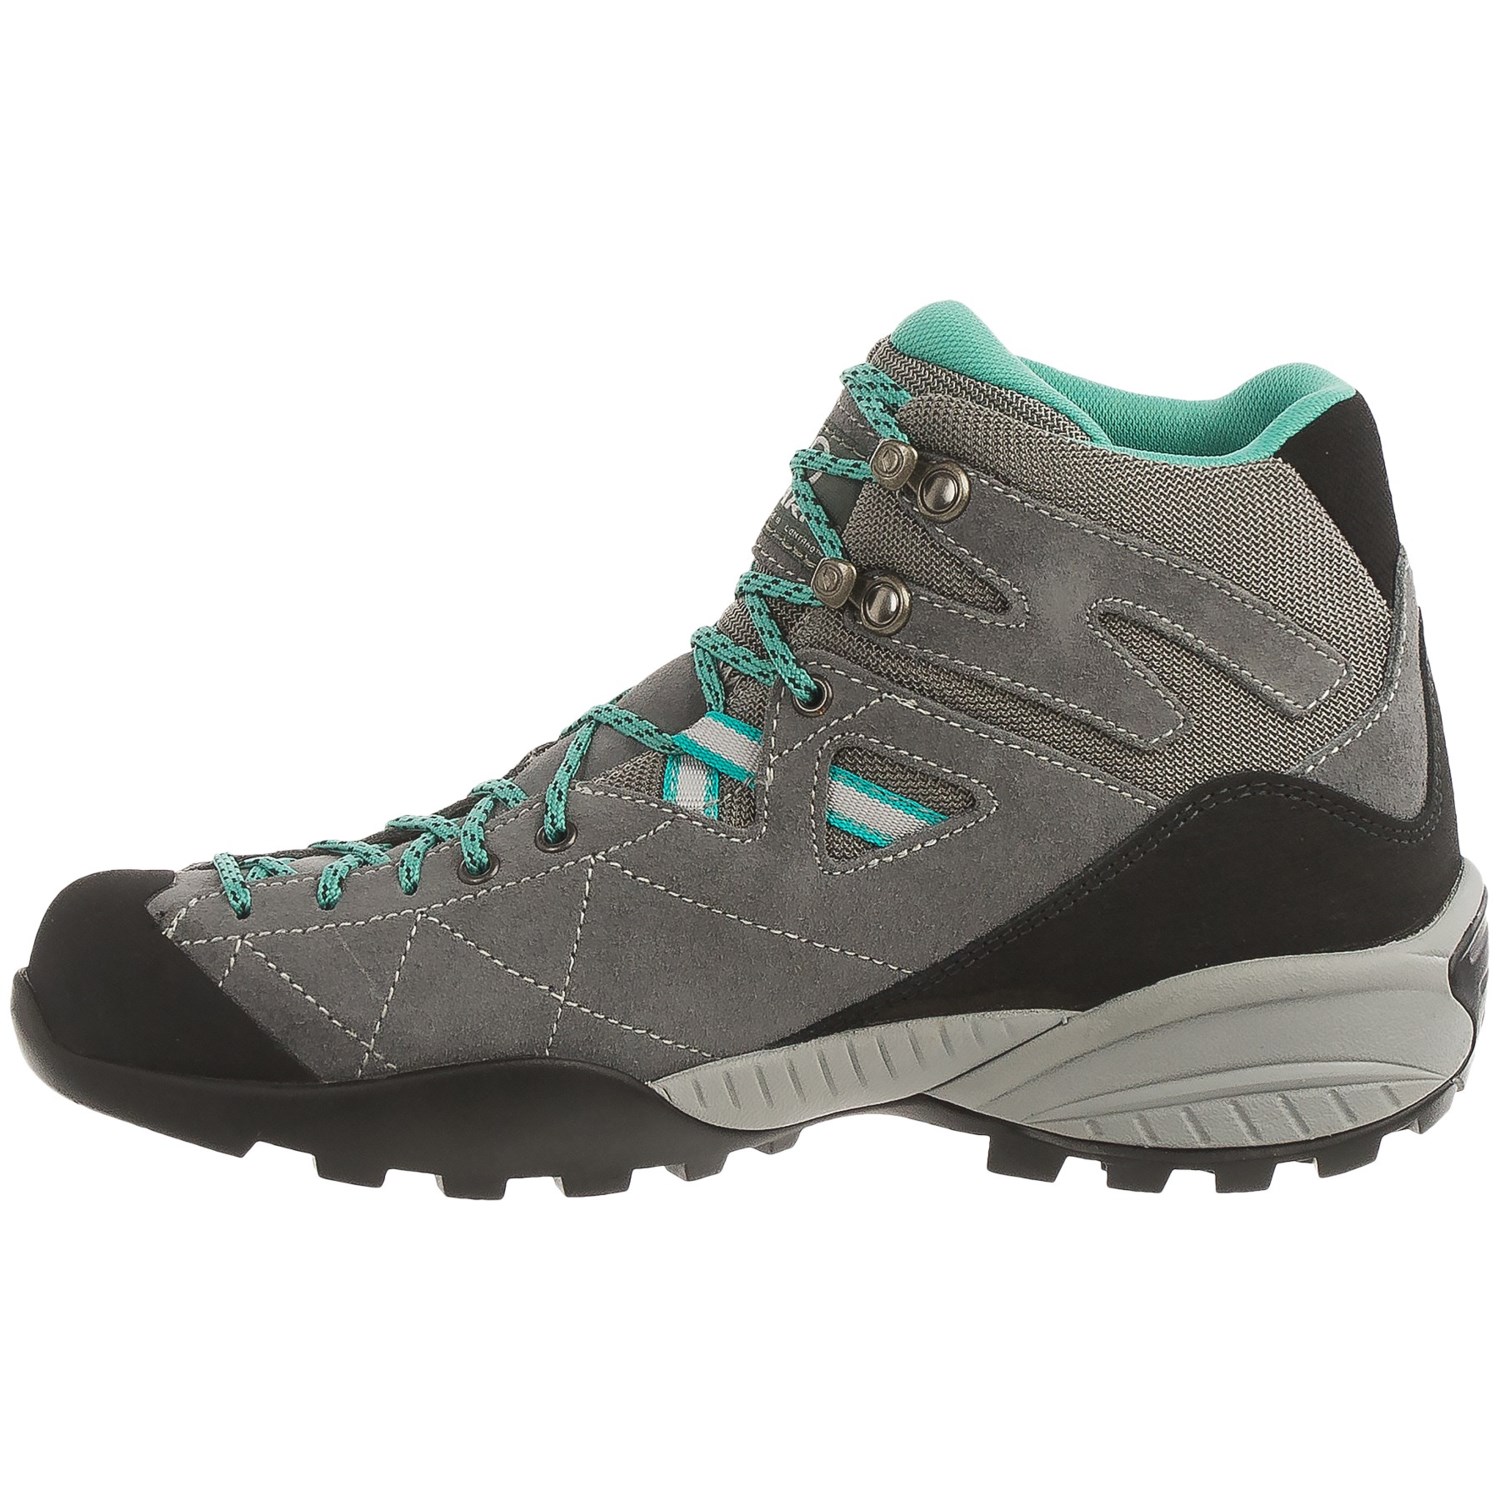 Scarpa Daylite Gore-Tex® Hiking Boots (For Women) - Save 42%